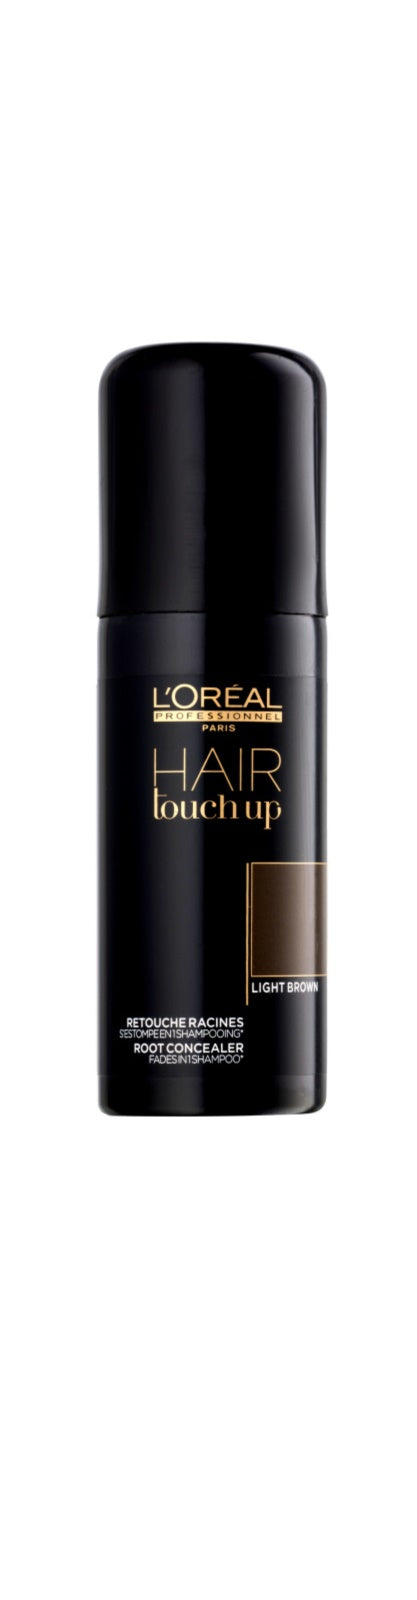 L’OREAL PROFESSIONNEL HAIR TOUCH UP LIGHT BROWN